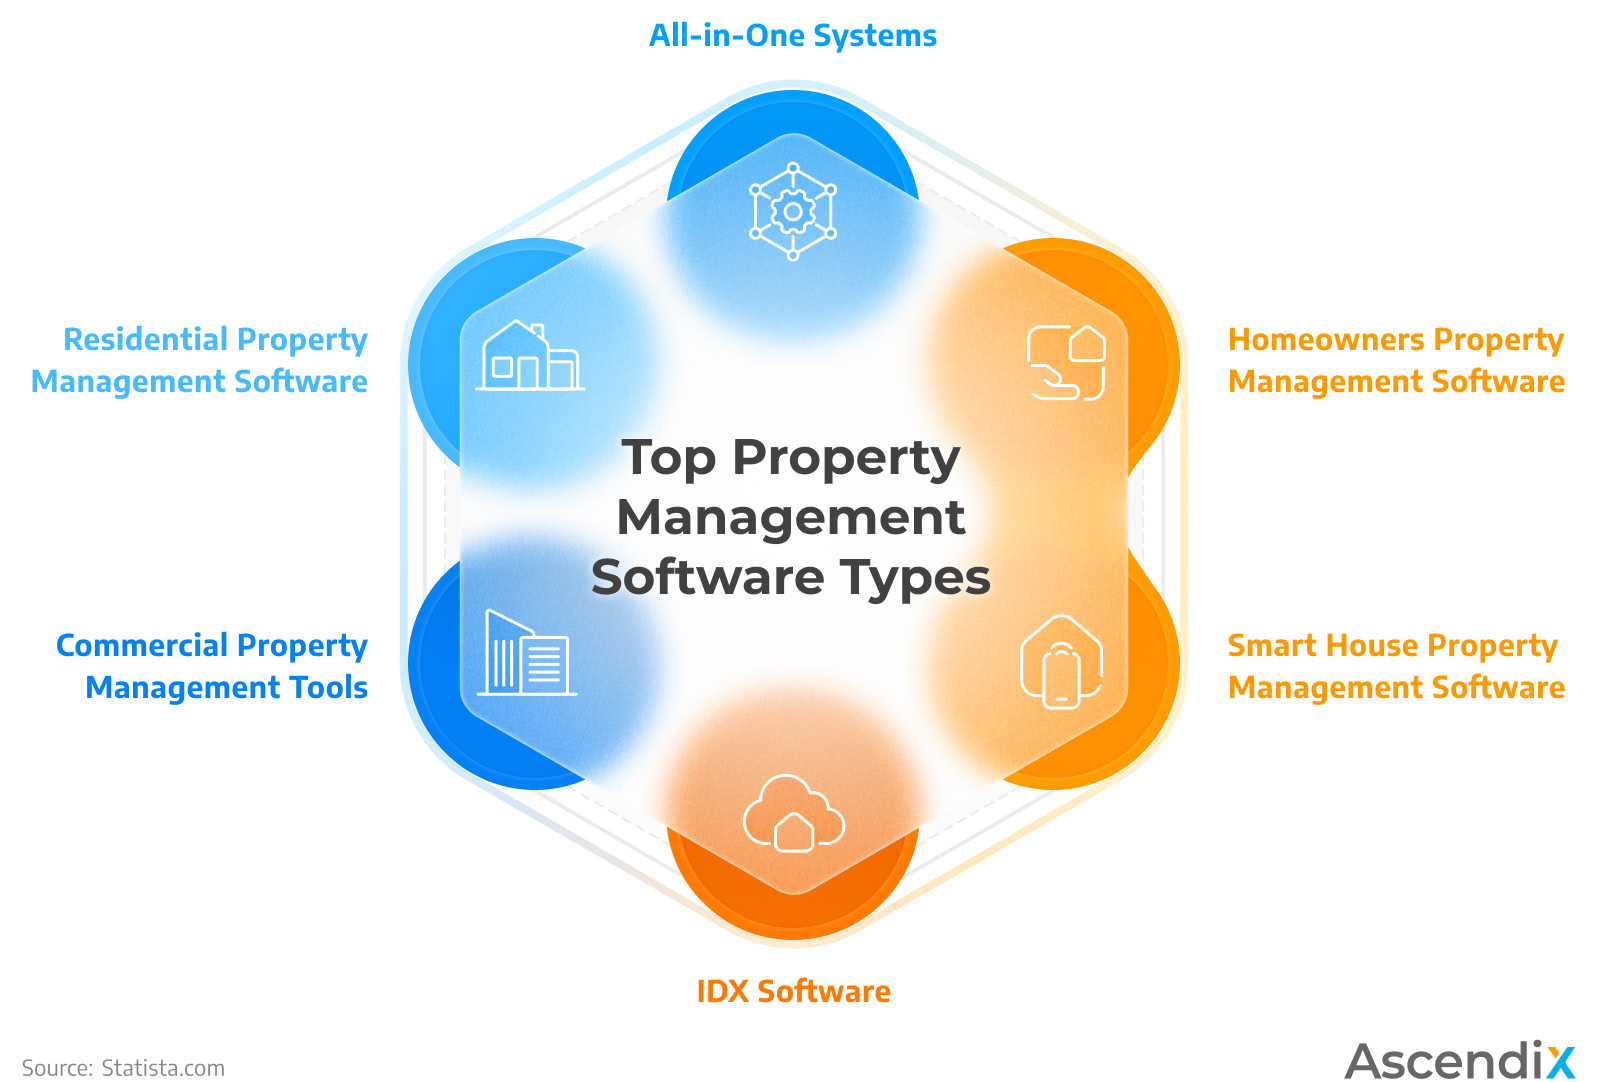 Top Property Management Software Types